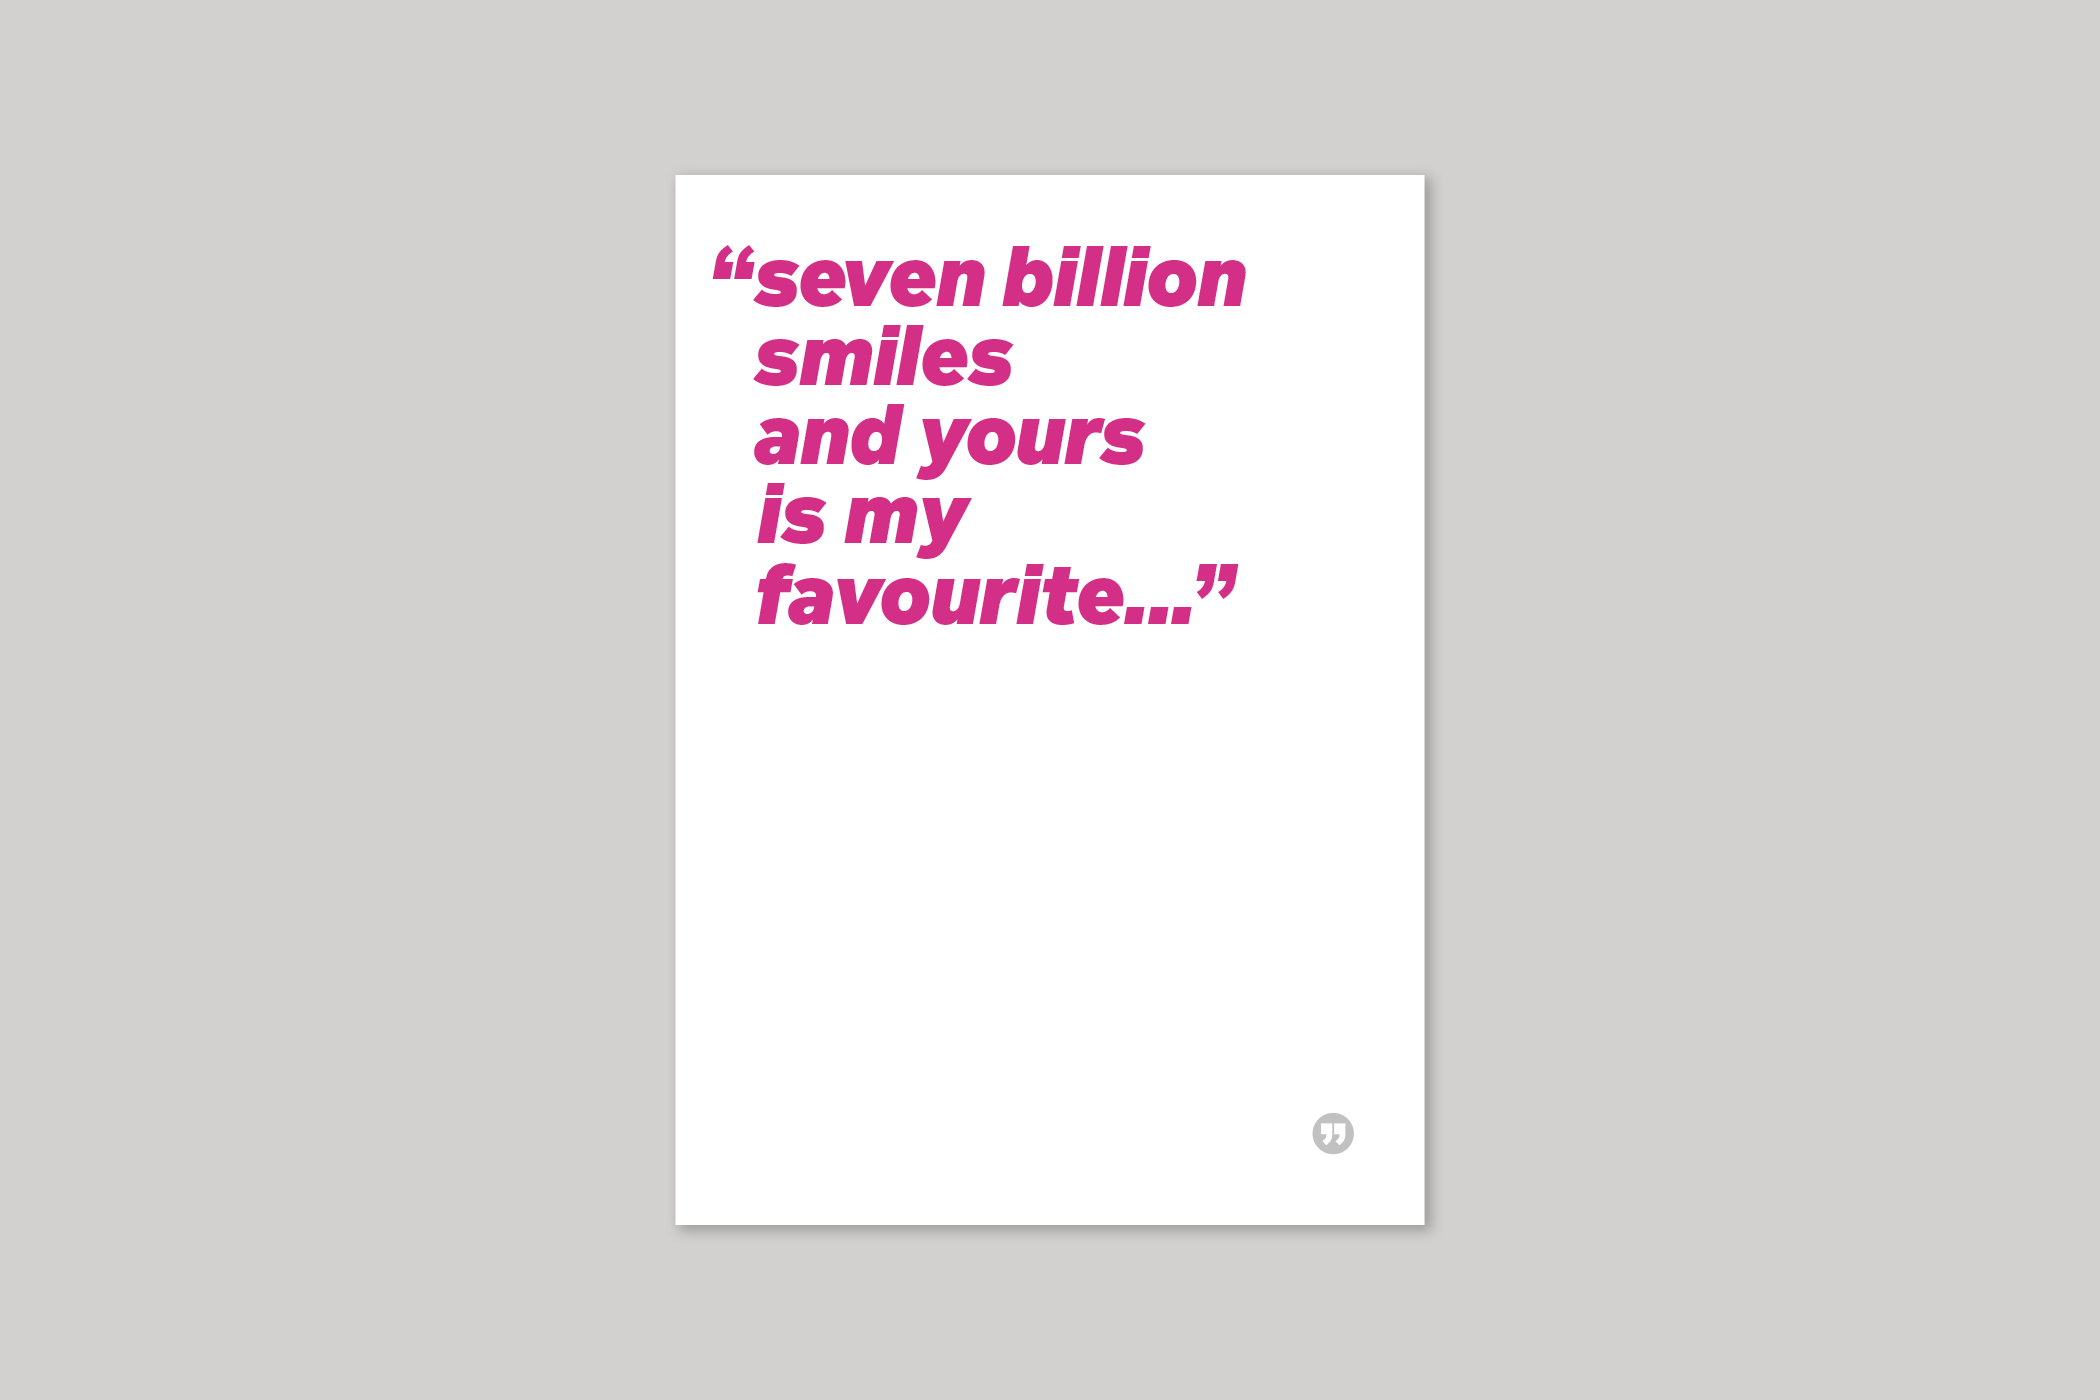 Seven Billlion Smiles funny quotation from Quotecards range of cards by Icon.